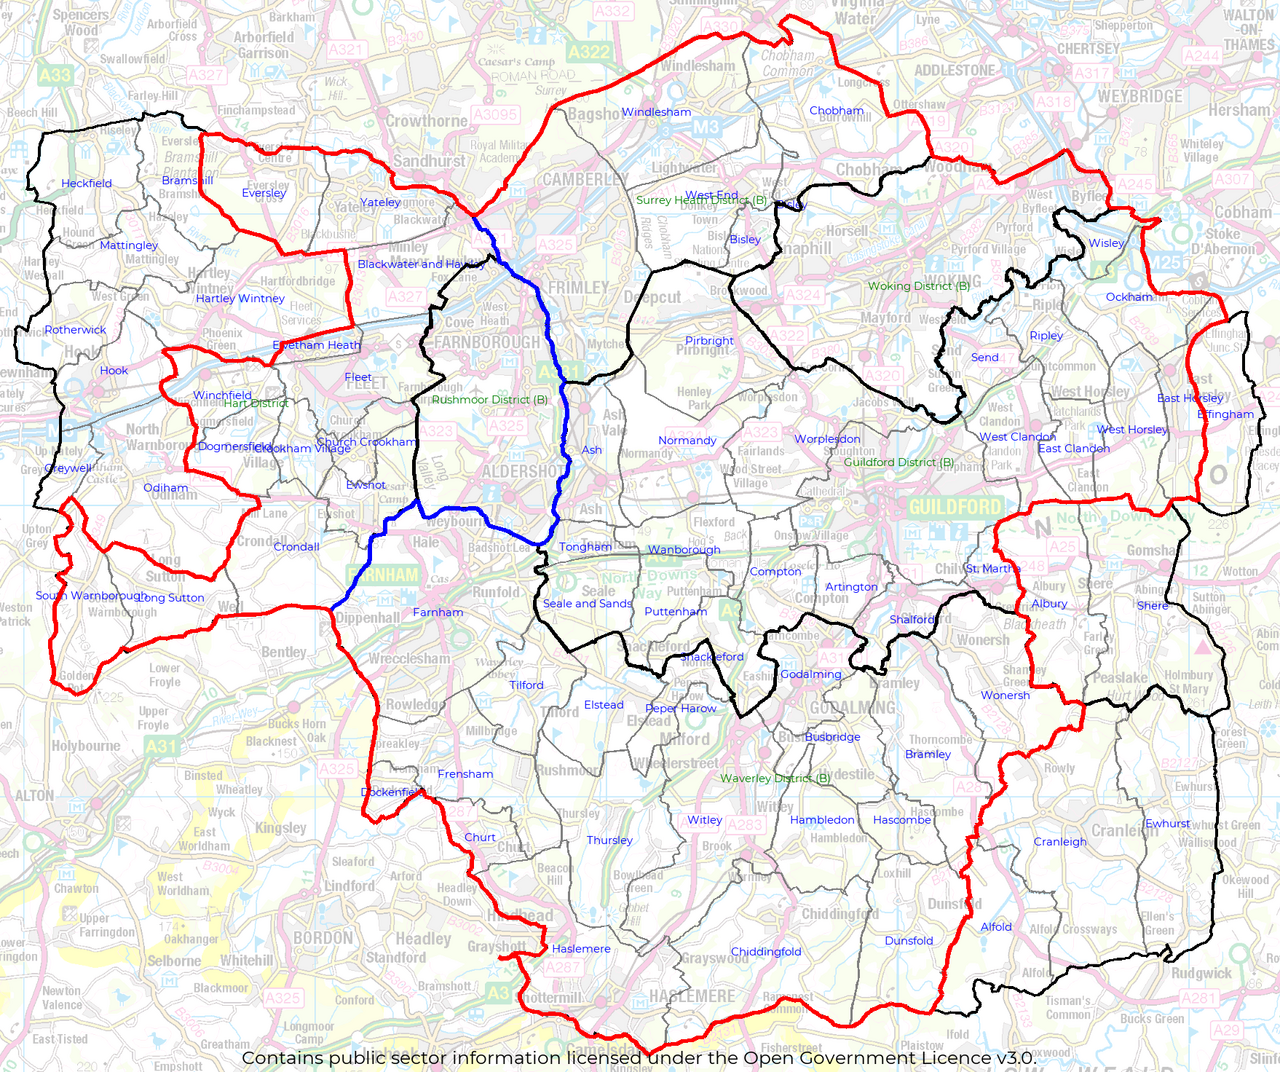 The Surrey/Hants Border CAMRA branch area is shown in red, with districts and parishes in black and the county border in blue.